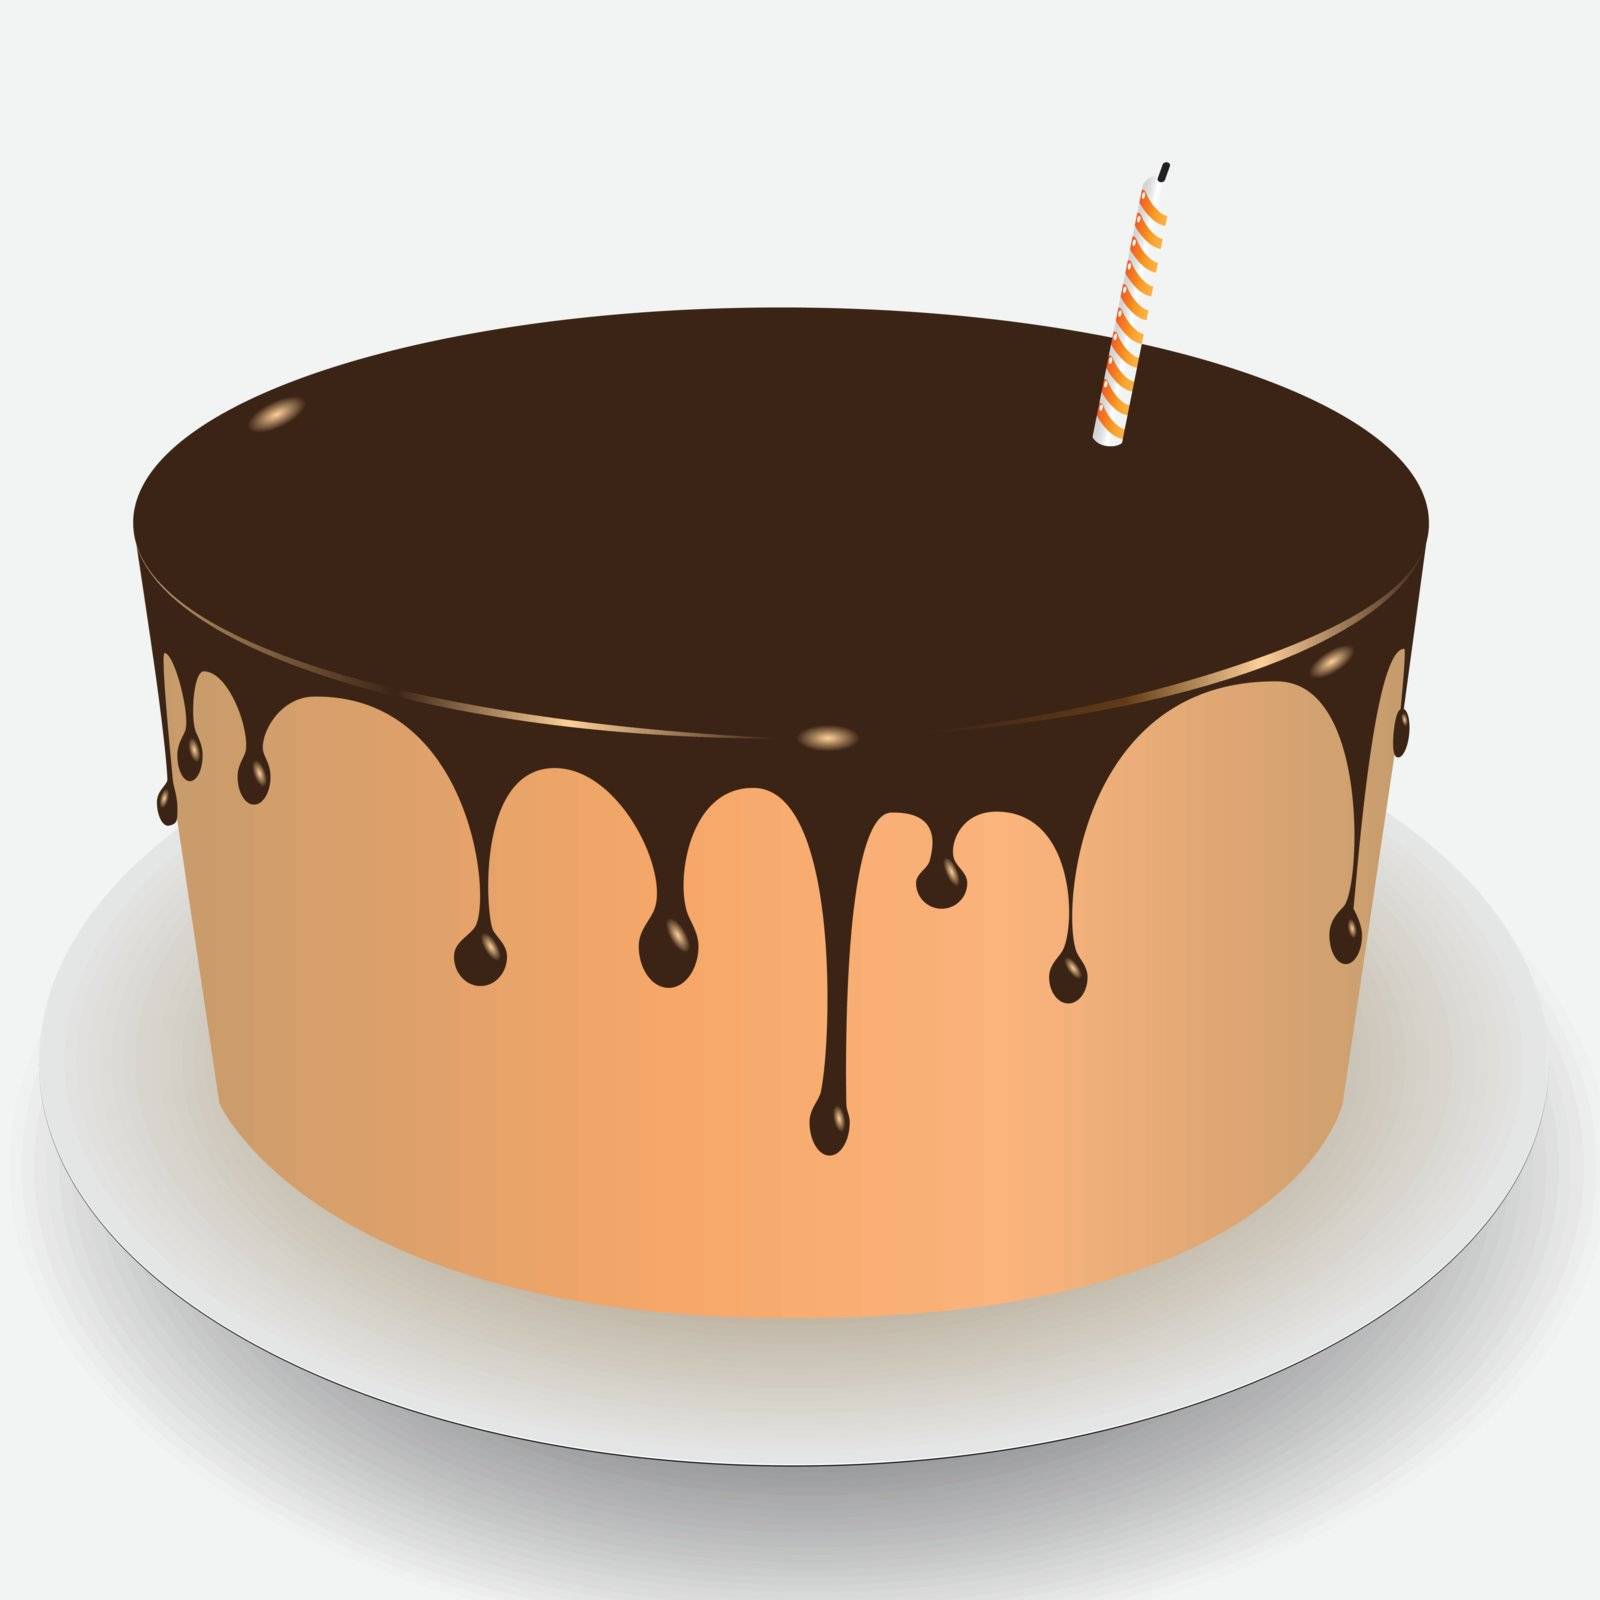 Cake with chocolate icing for the holiday. Vector illustration.